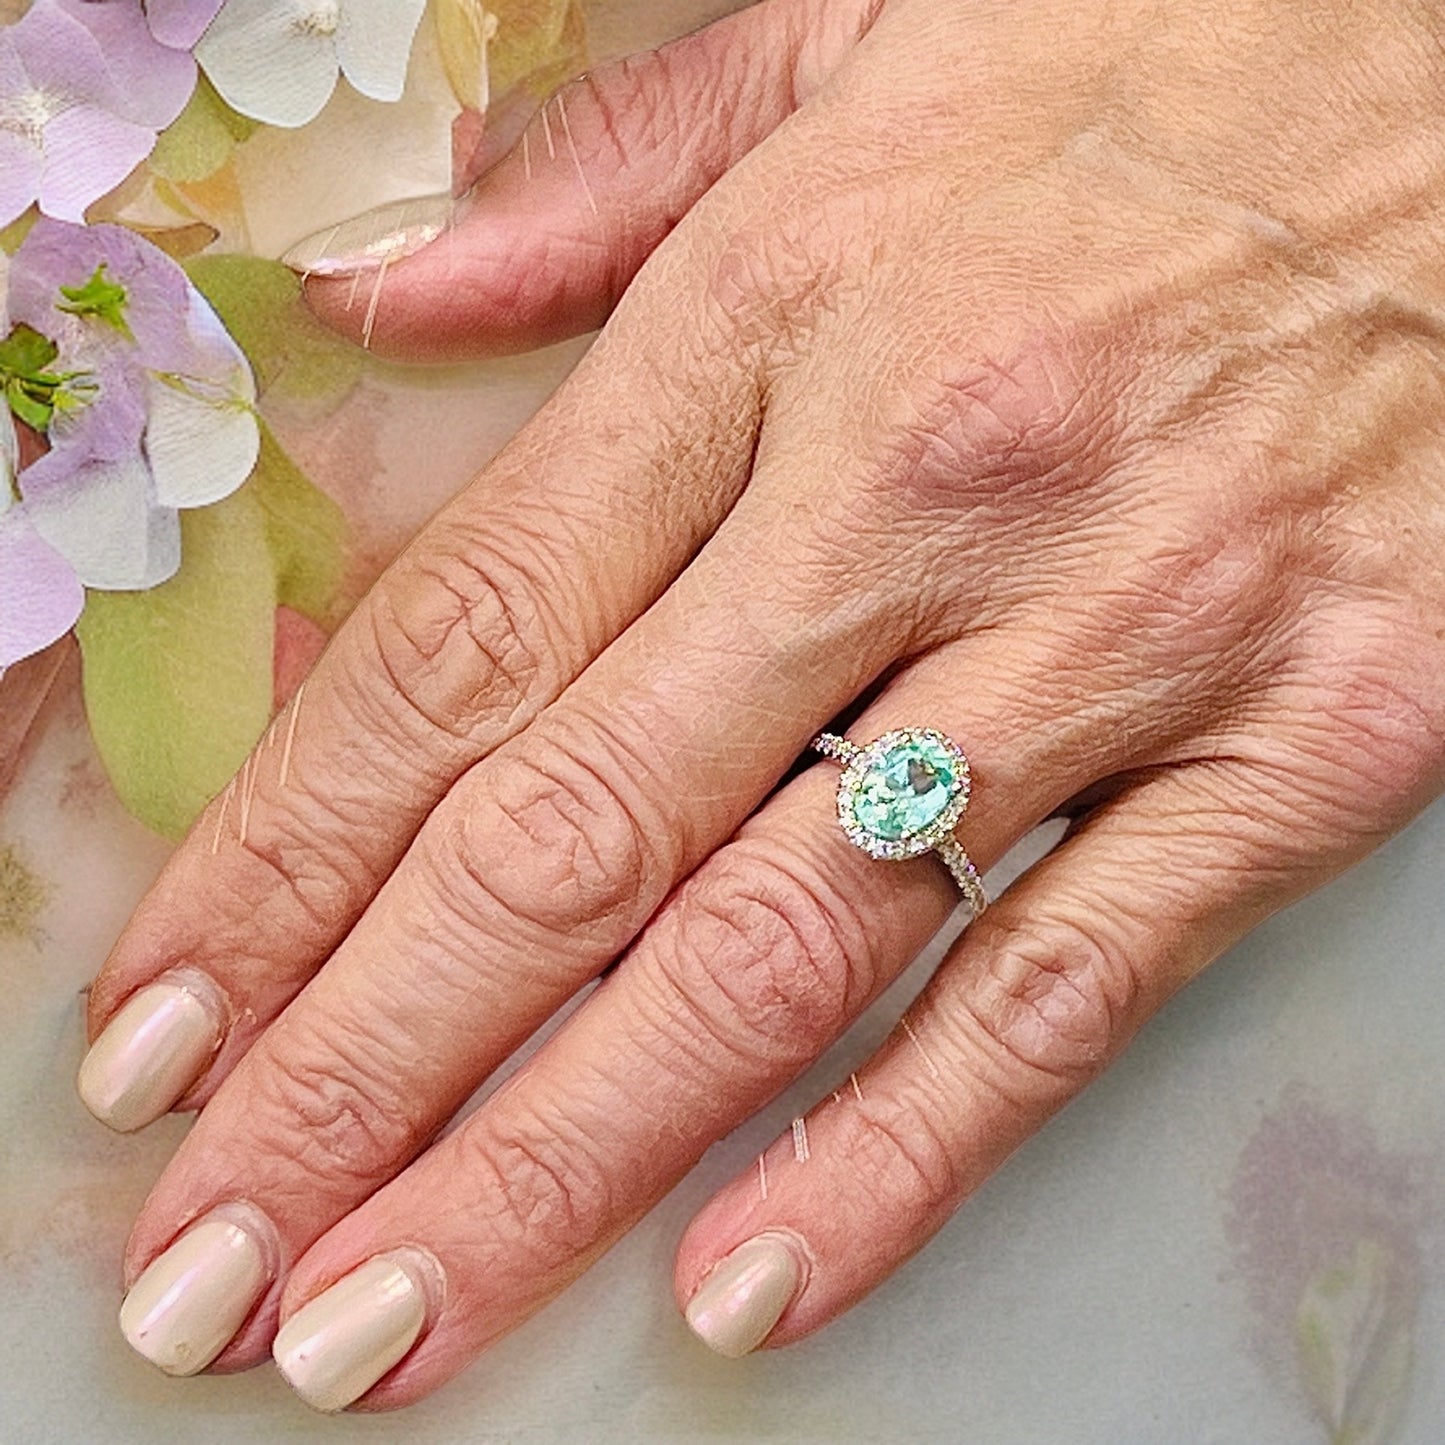 Natural Colombian Emerald Diamond Ring Size 6.5 14k W Gold 2.98 TCW Certified $6,790 218110 - Certified Fine Jewelry